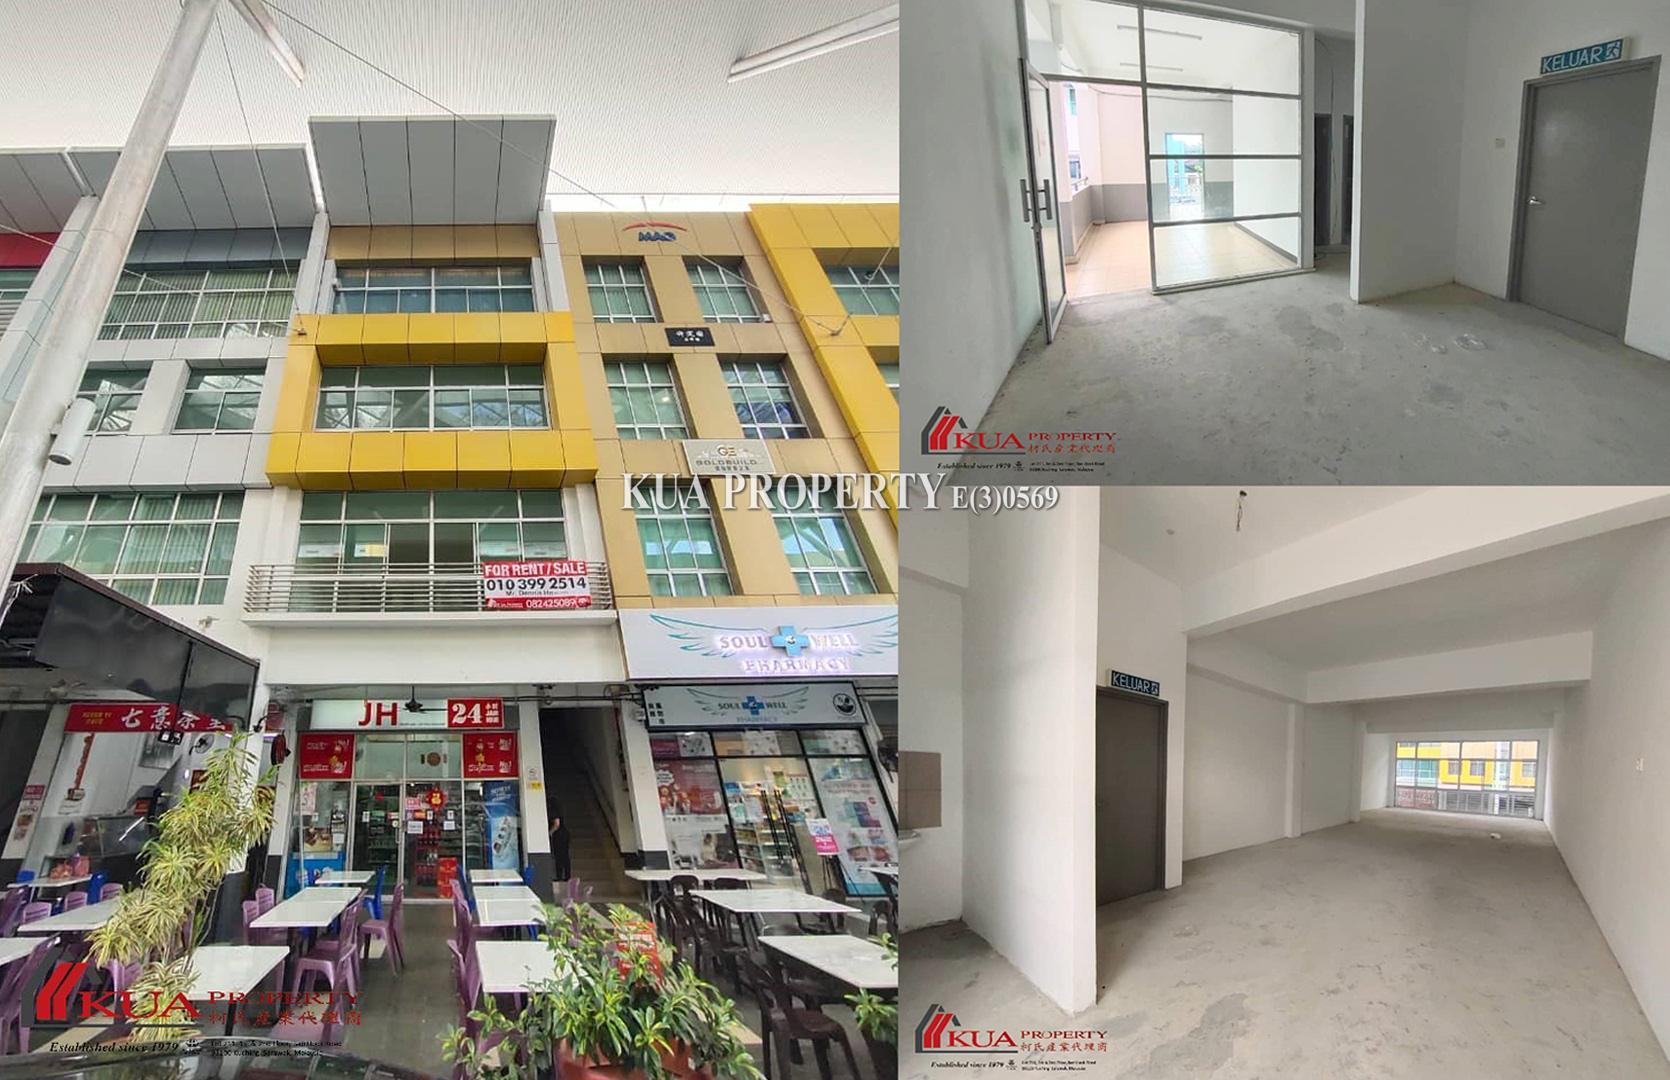 Icom Square First Floor Shoplot/Office For Rent! at Pending, Kuching